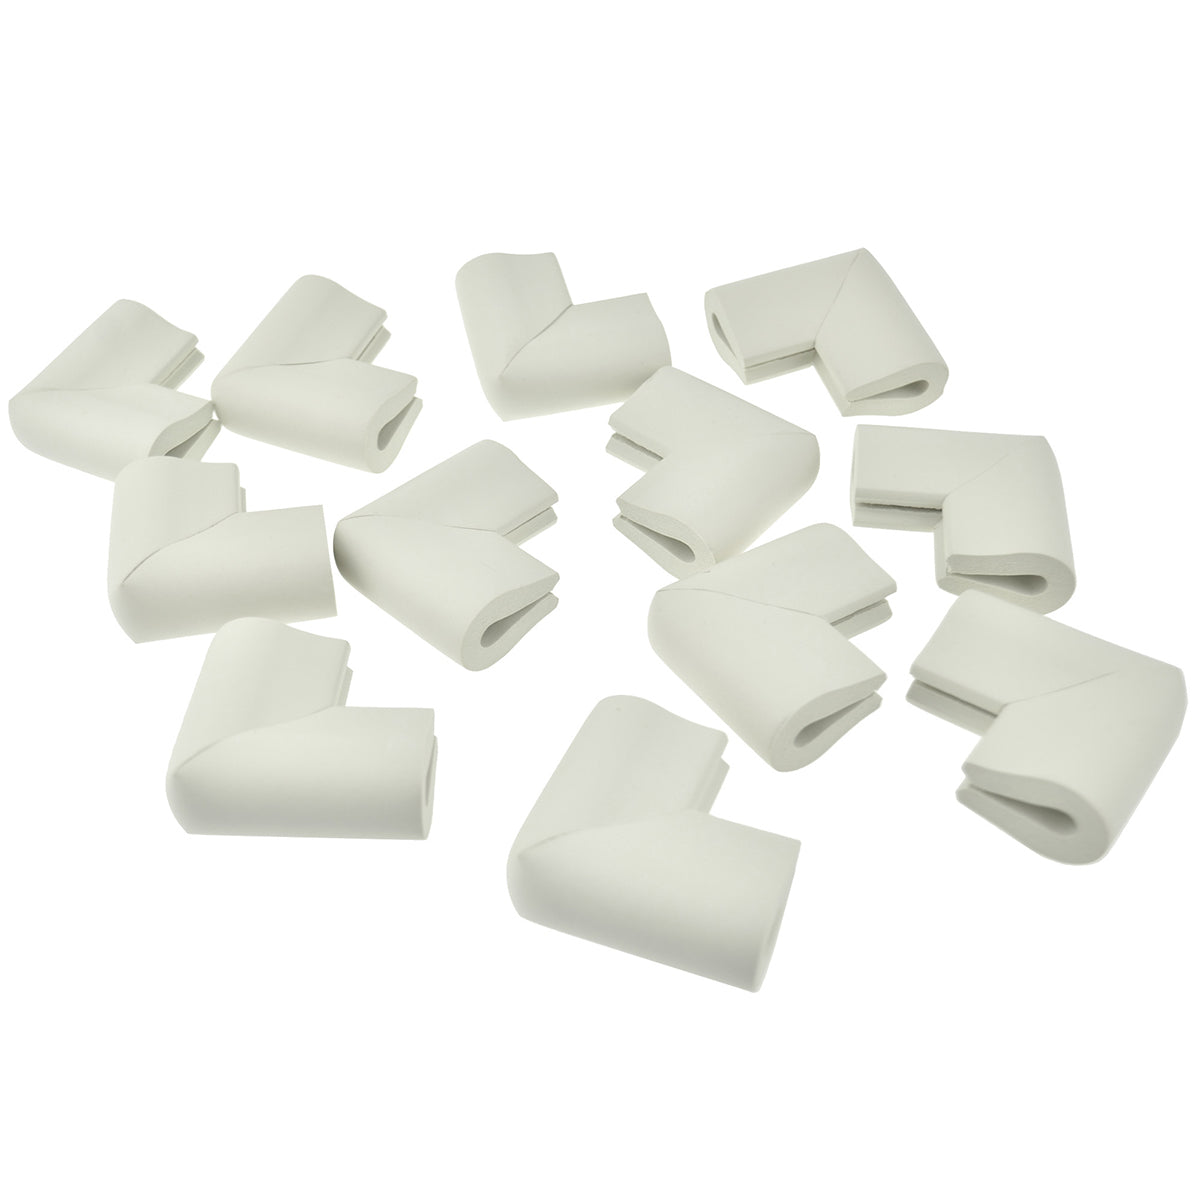 12 pieces randomly placed cream white u-shaped foam corner protectors show with a white background.